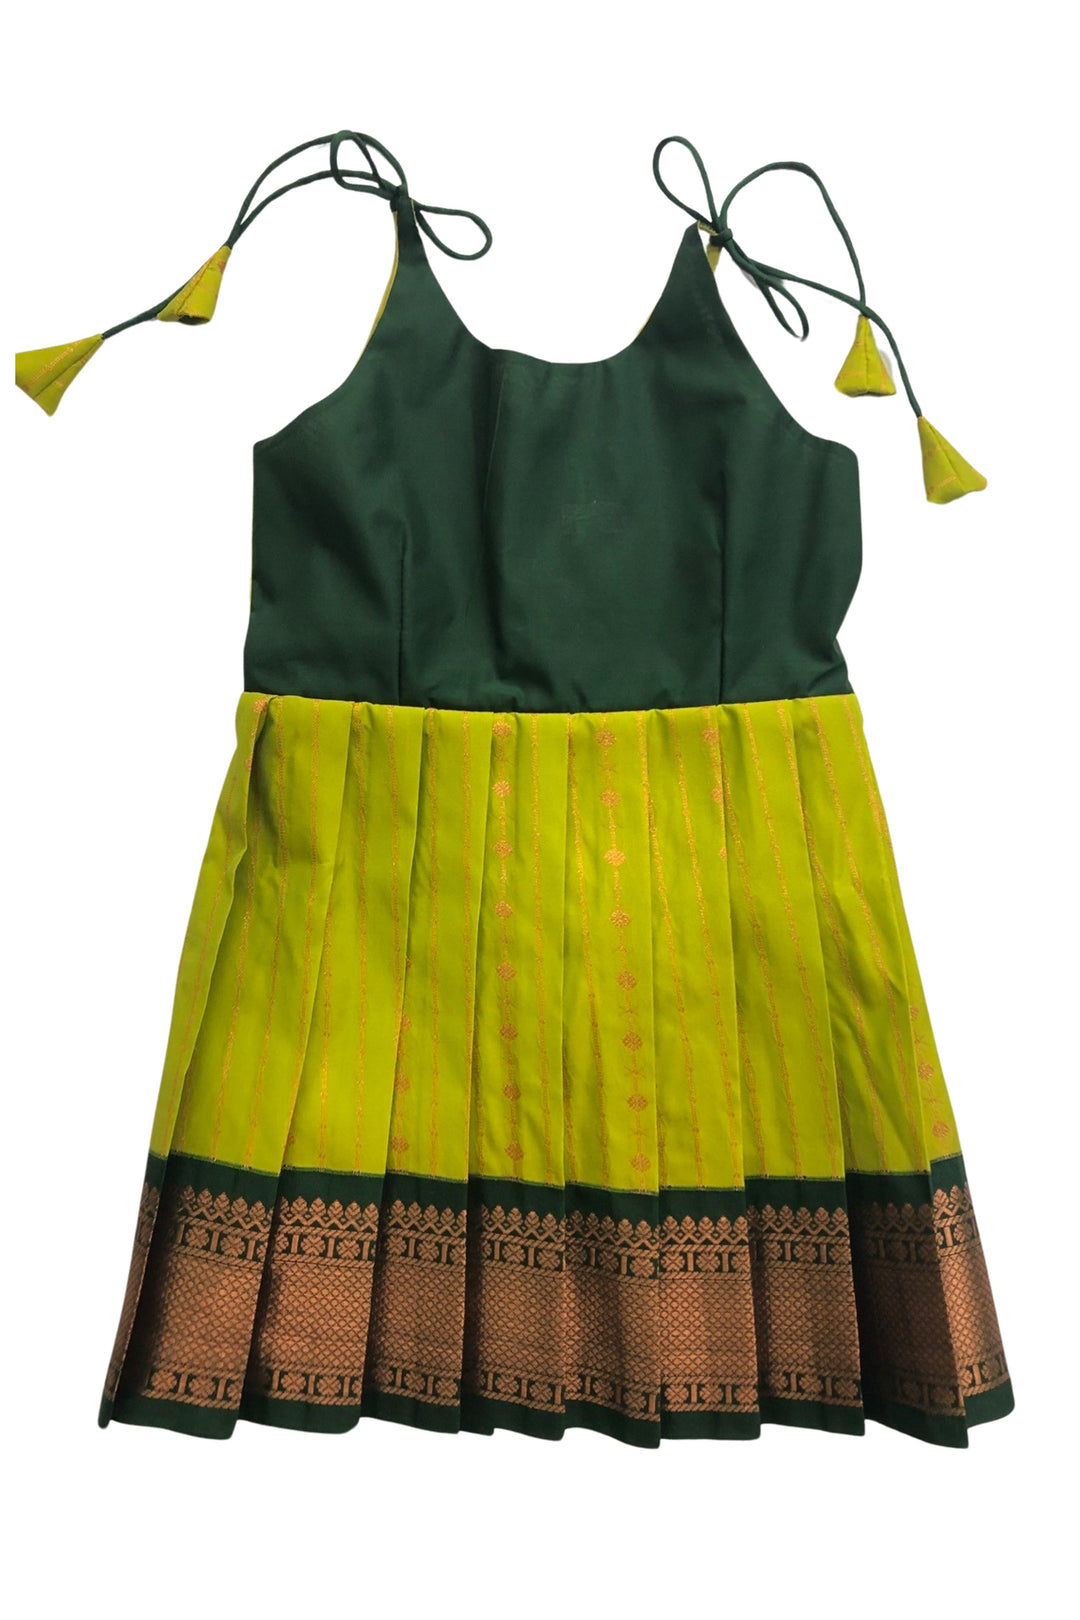 The Nesavu Tie Up Frock Vibrant Lime and Cocoa Silk Tie-Up Frock – Exotic Fusion Fashion Nesavu 16 (1Y) / Green / Style 6 T319F-16 Lime & Cocoa Silk Frock | Trendy Geometric Print Tie-Up Dress | The Nesavu